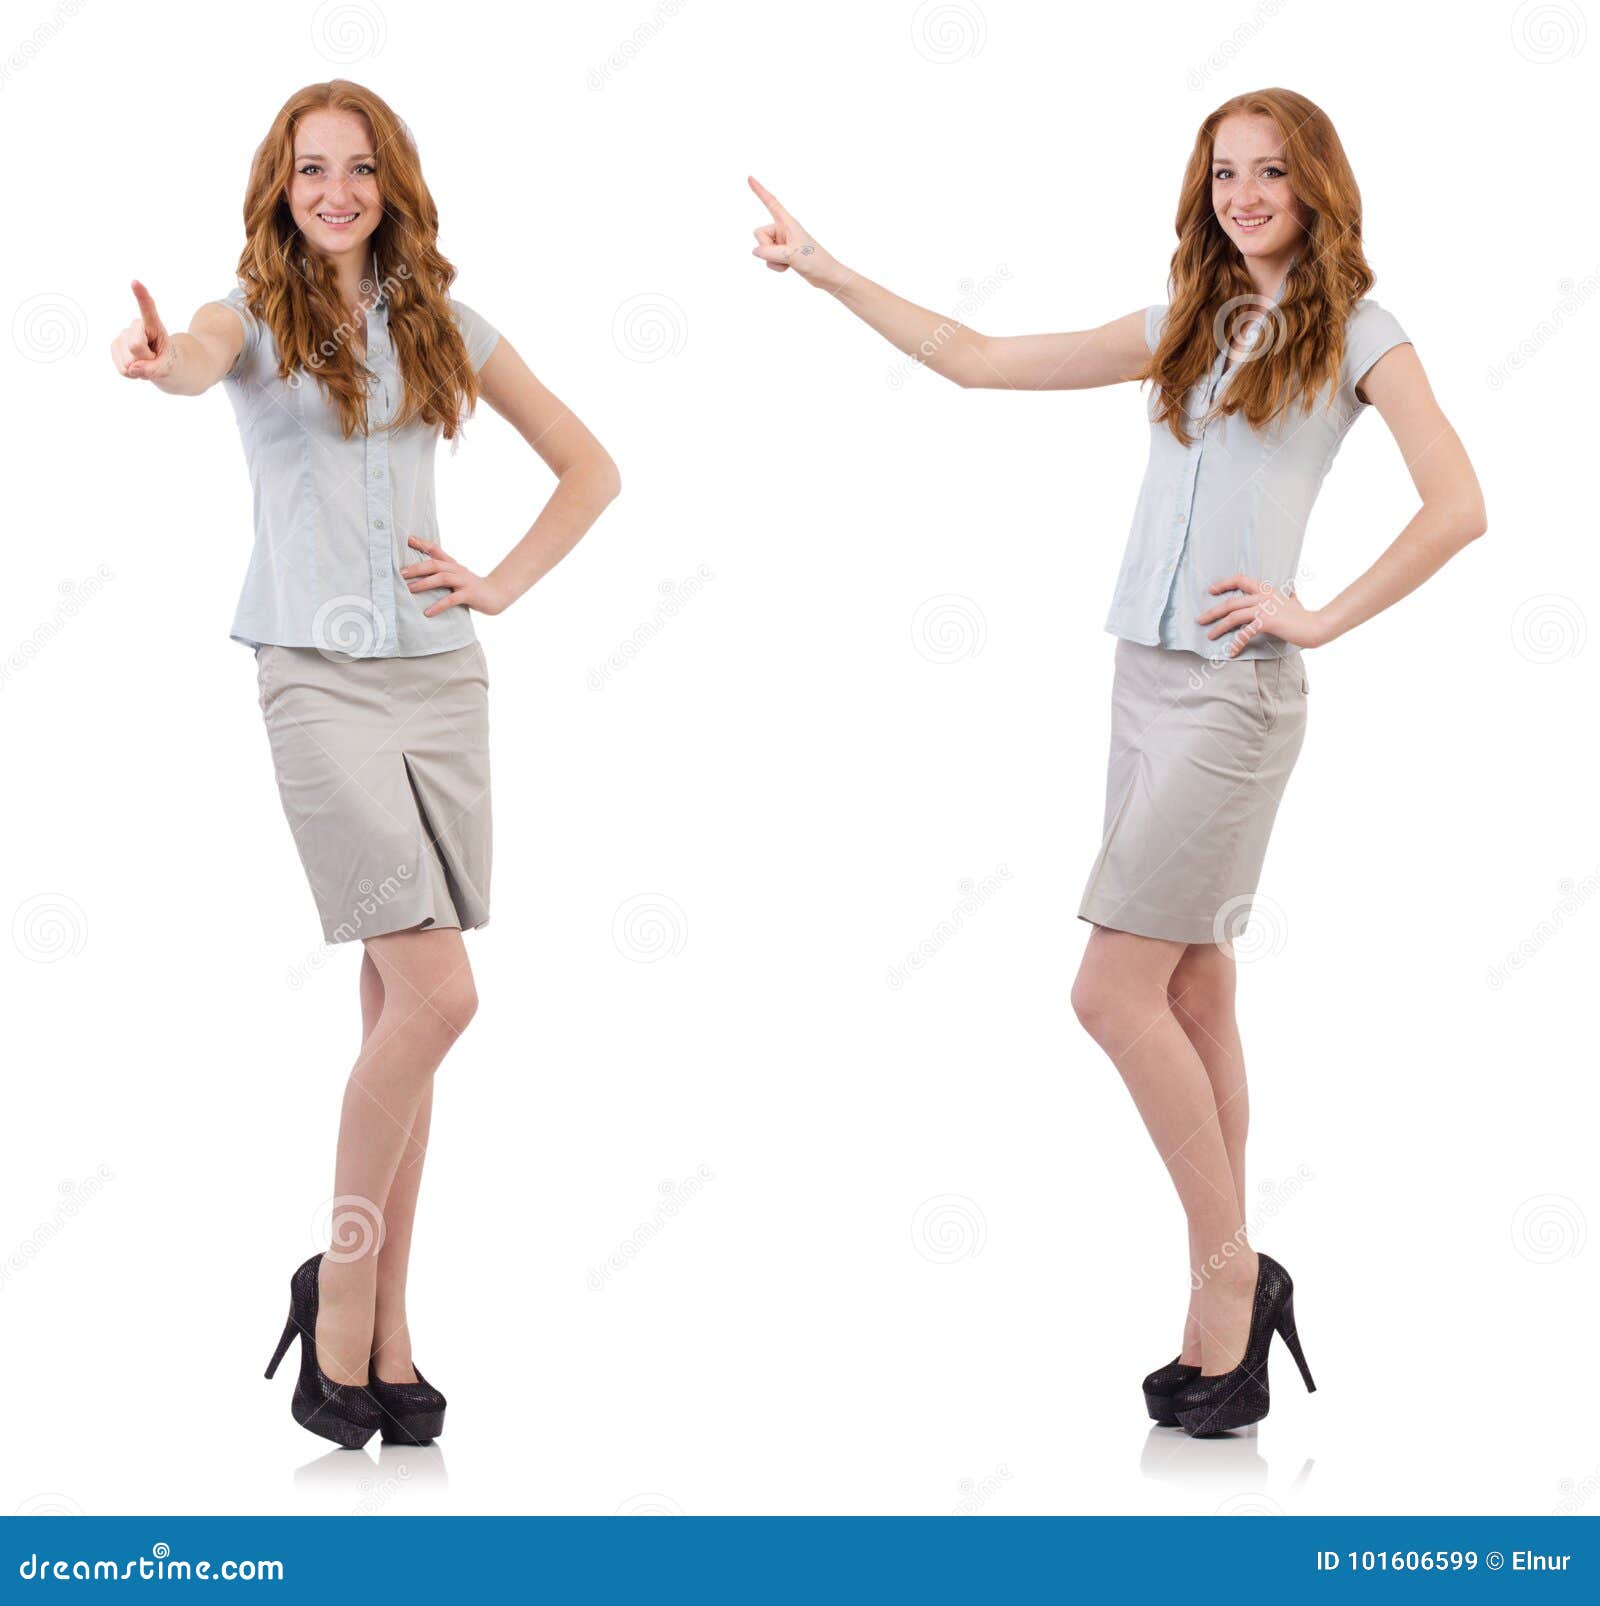 The Pretty Young Employee Isolated on White Stock Image - Image of ...